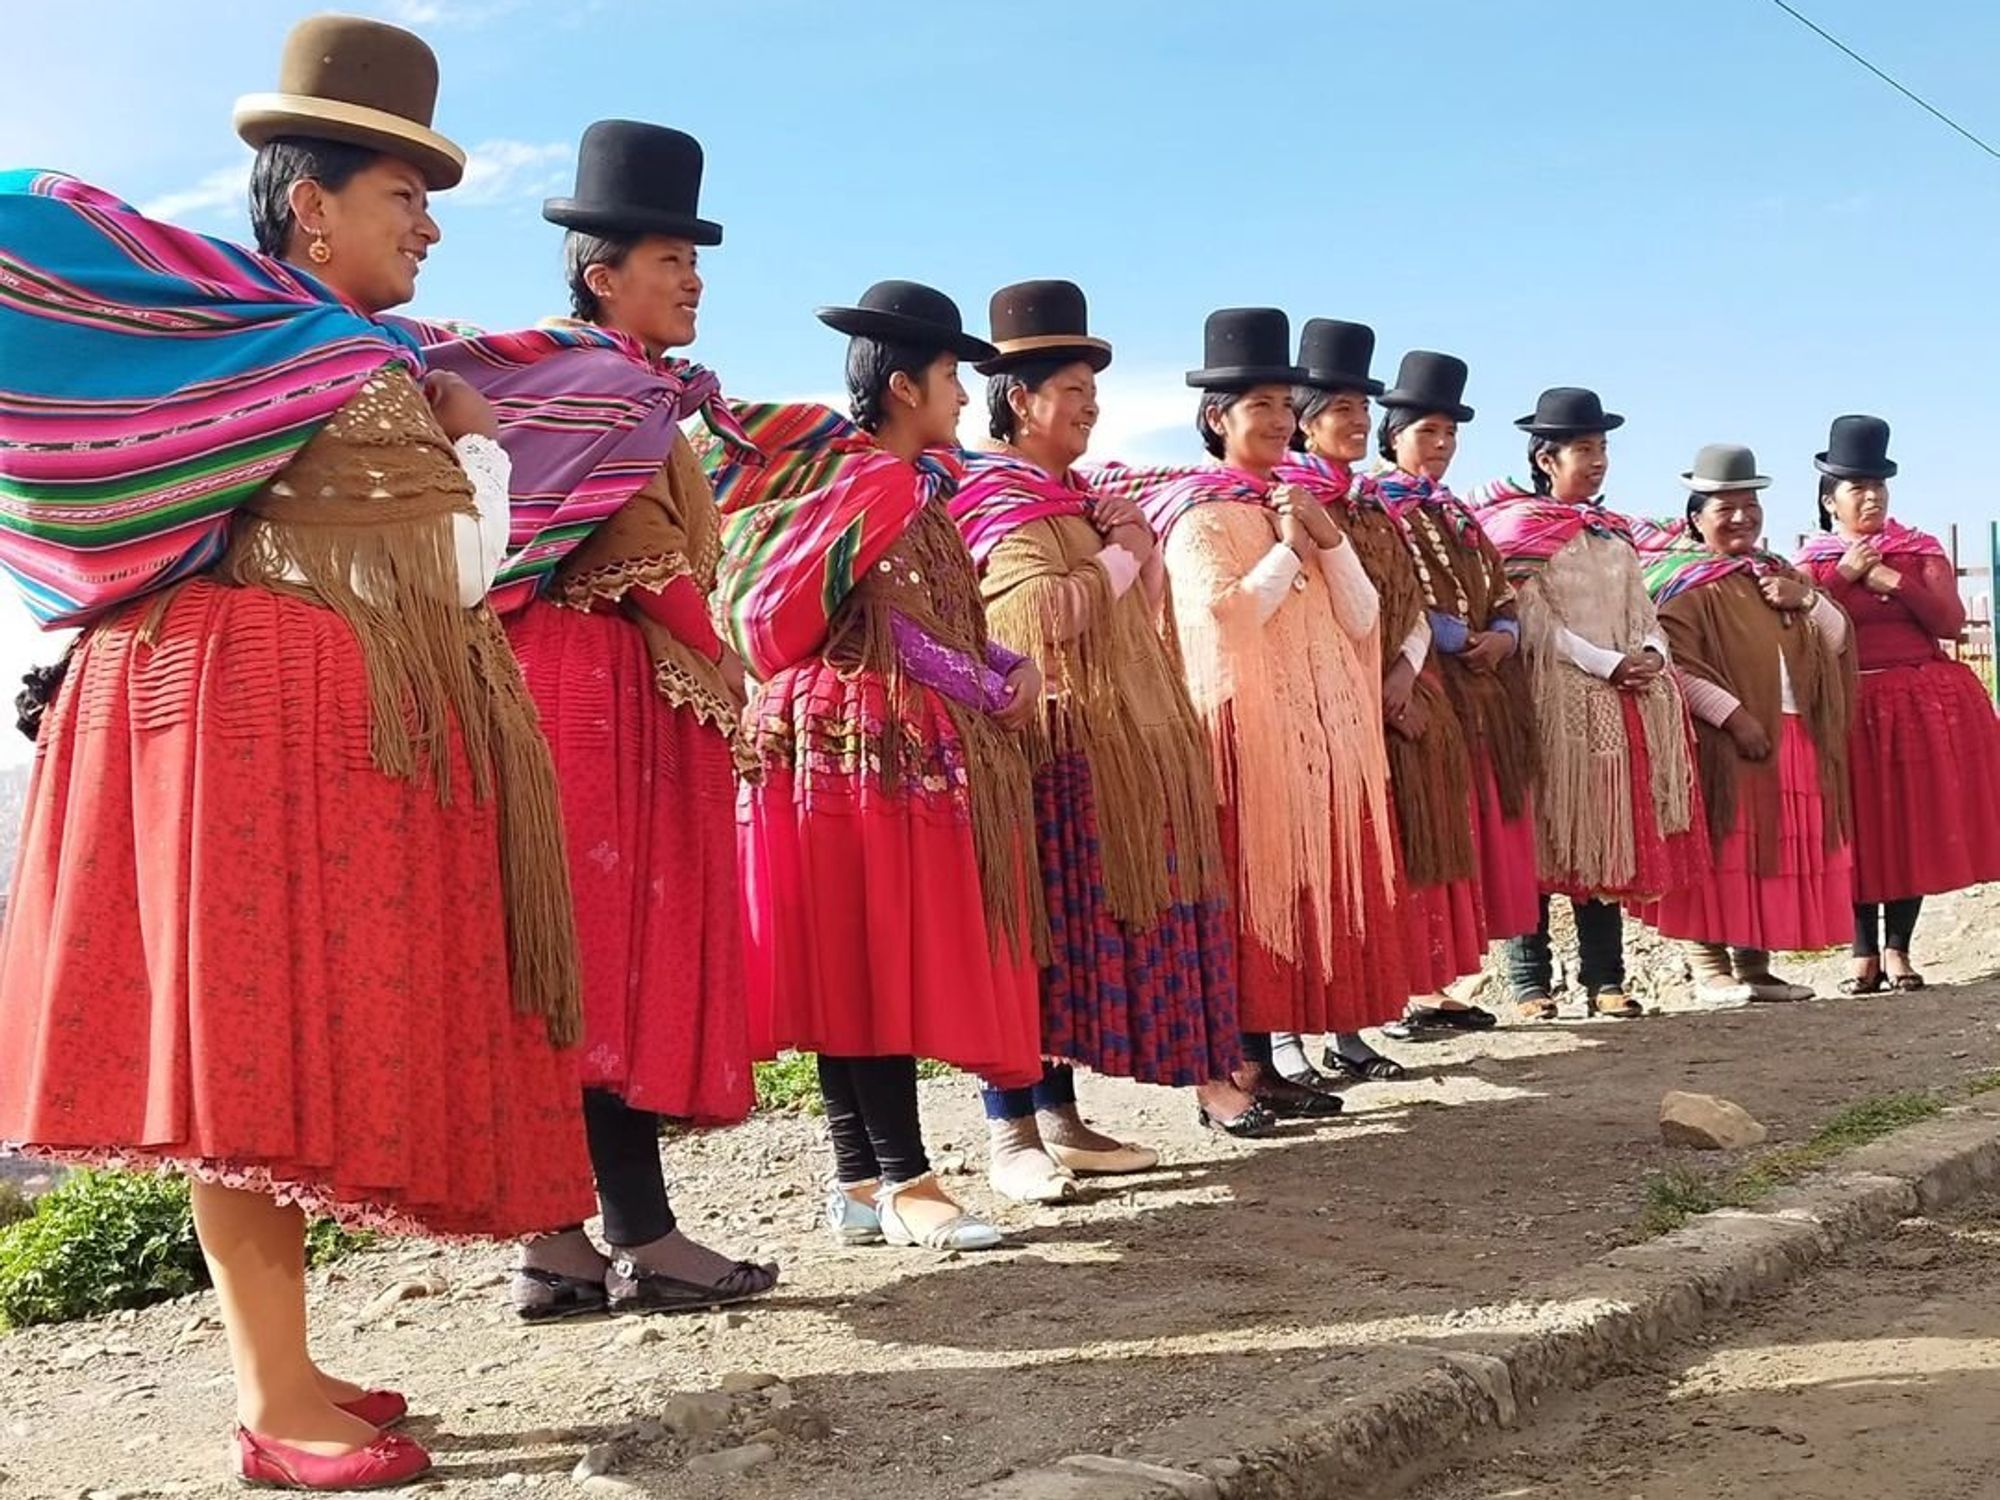 A group of Bolivian cholitas in their traditional costumes, reflecting their rich cultural heritage and identity.